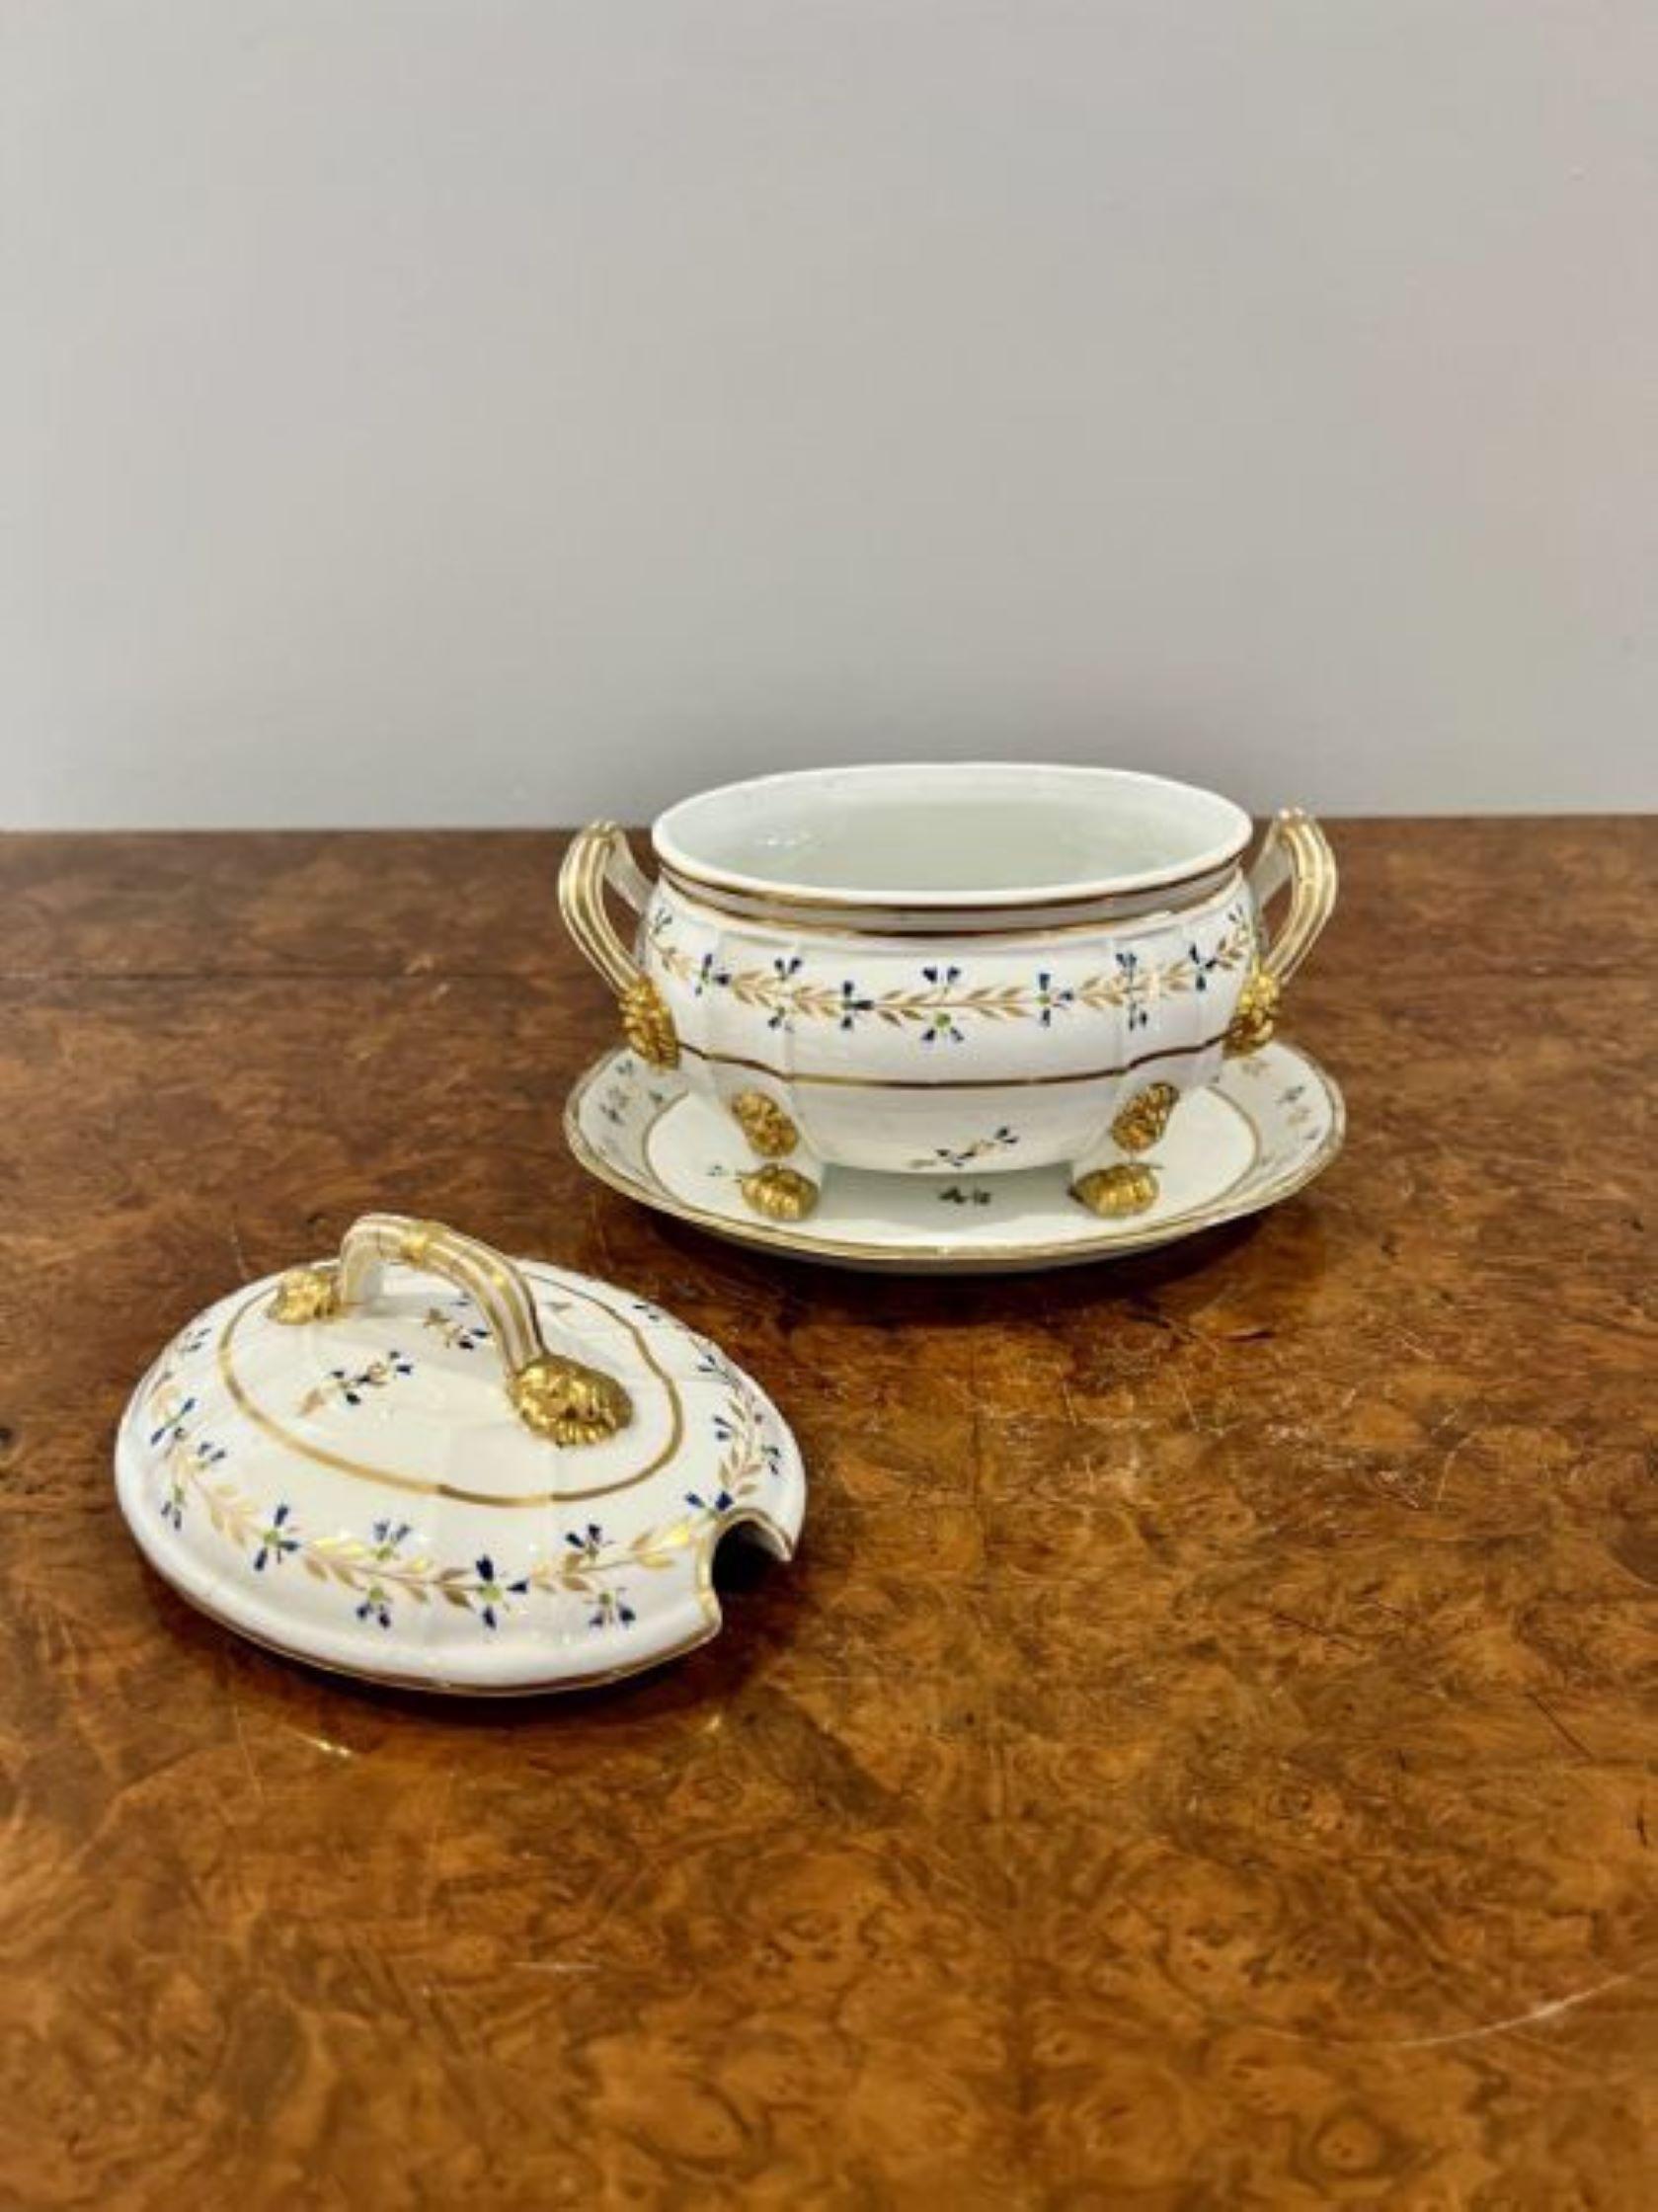 Outstanding quality early 19th century crown derby tureen and cover, outstanding quality early 19th century crown derby tureen and cover with the original stand, wonderful hand painted decoration in blue, green and gold colours with gilded gold